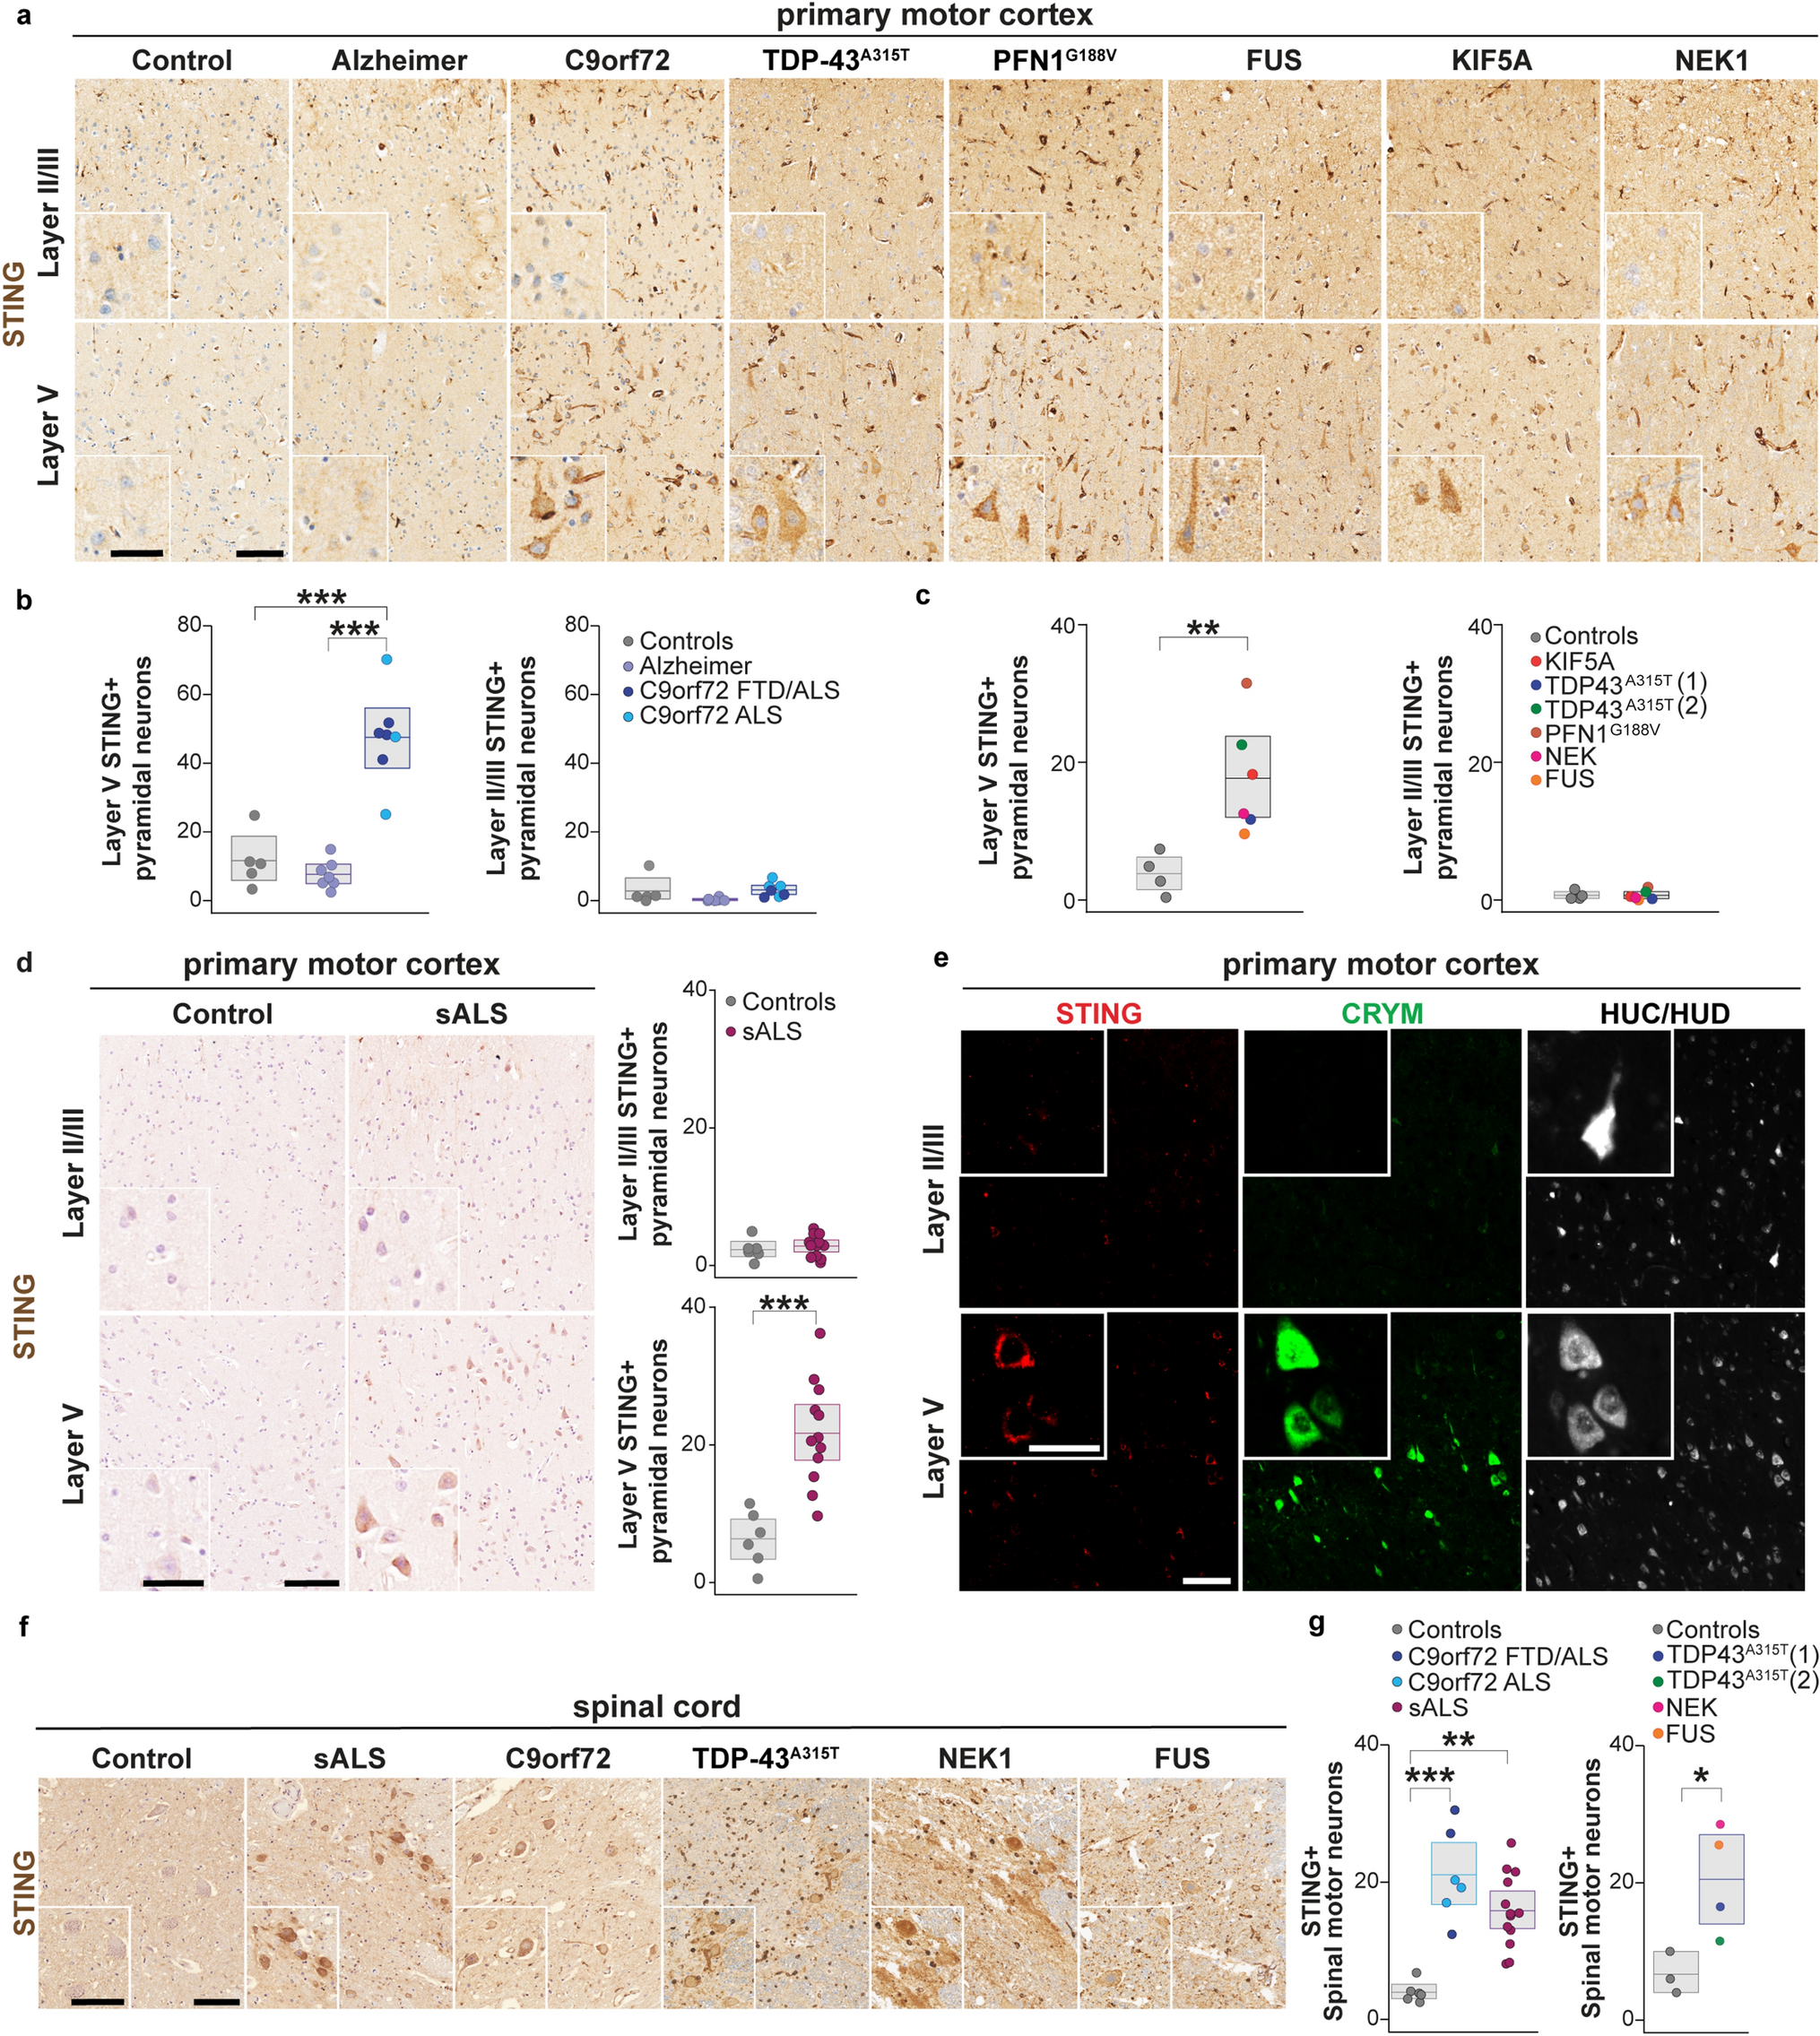 Neuronal STING activation in amyotrophic lateral sclerosis and frontotemporal dementia